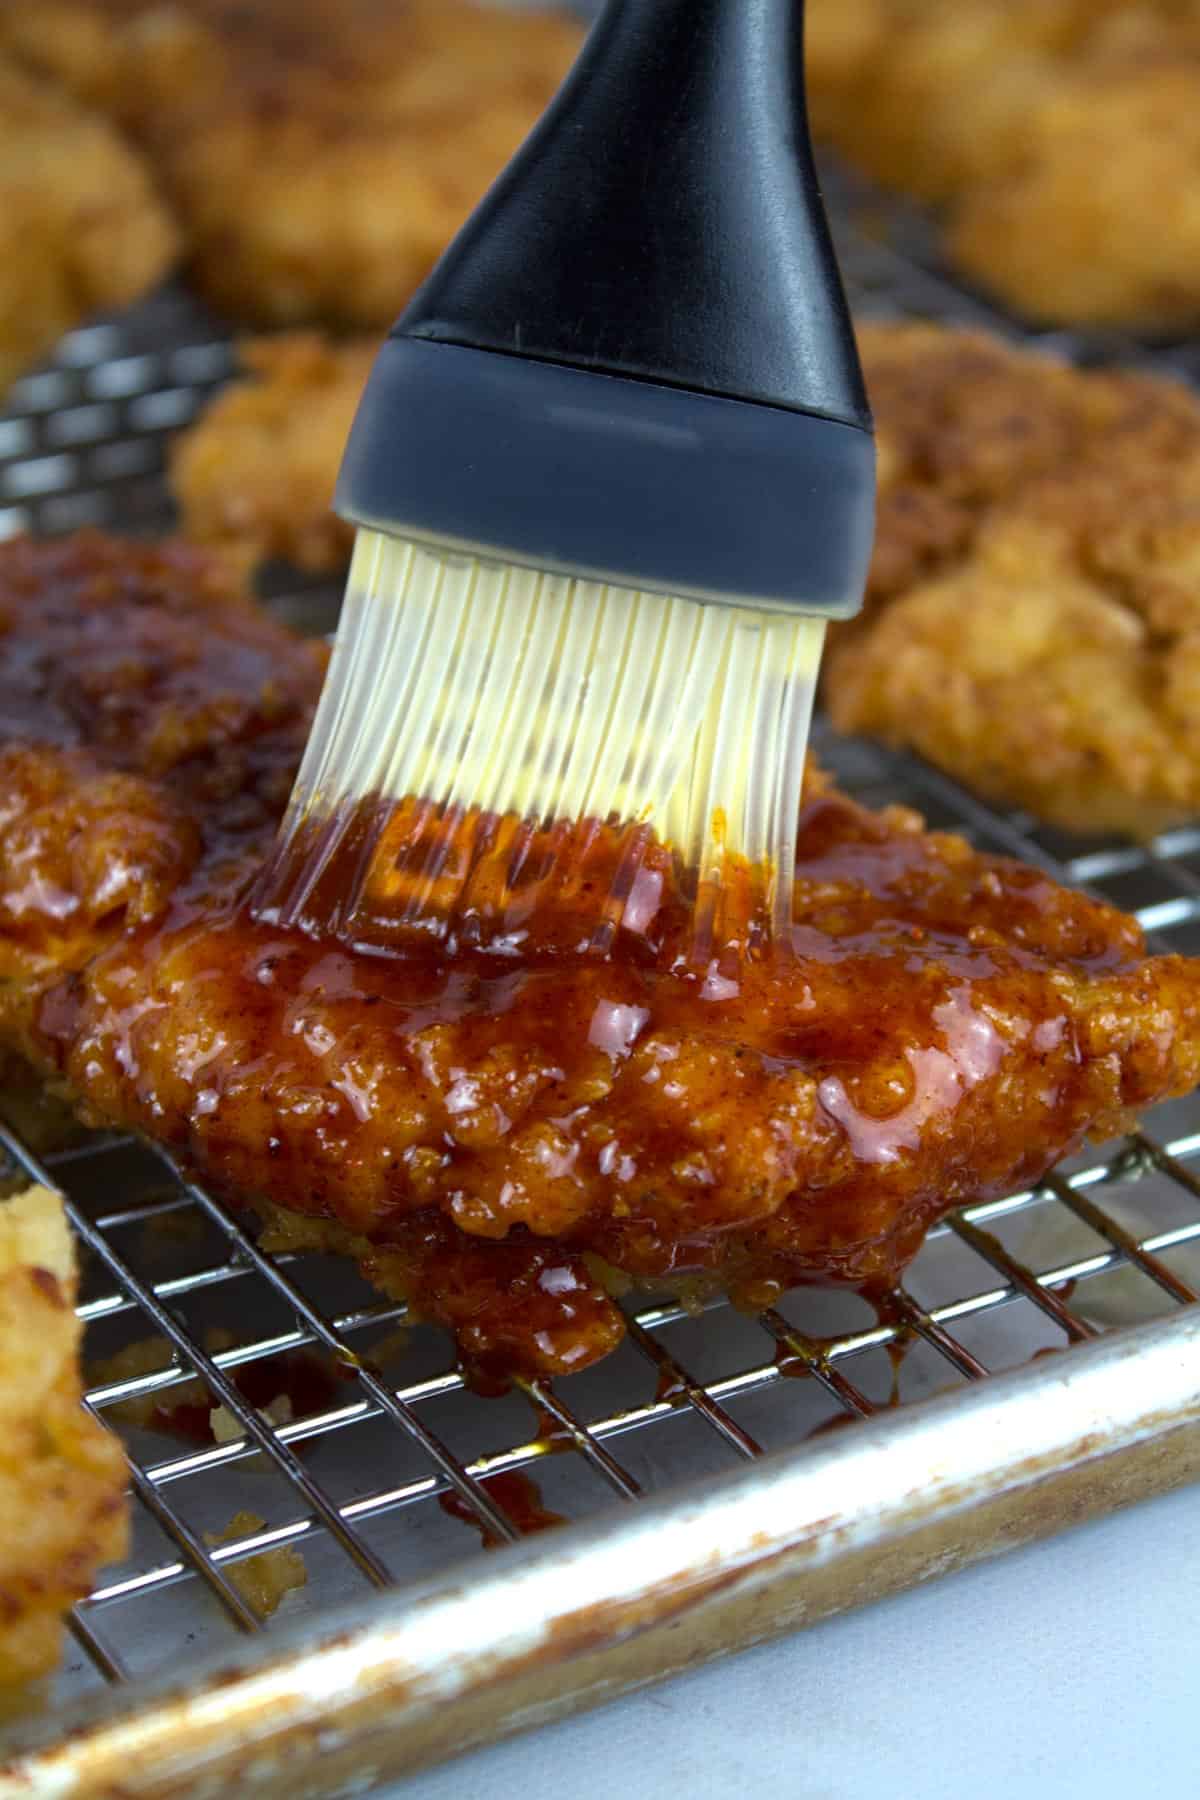 Brushing crispy chicken cutlet with hot honey sauce.